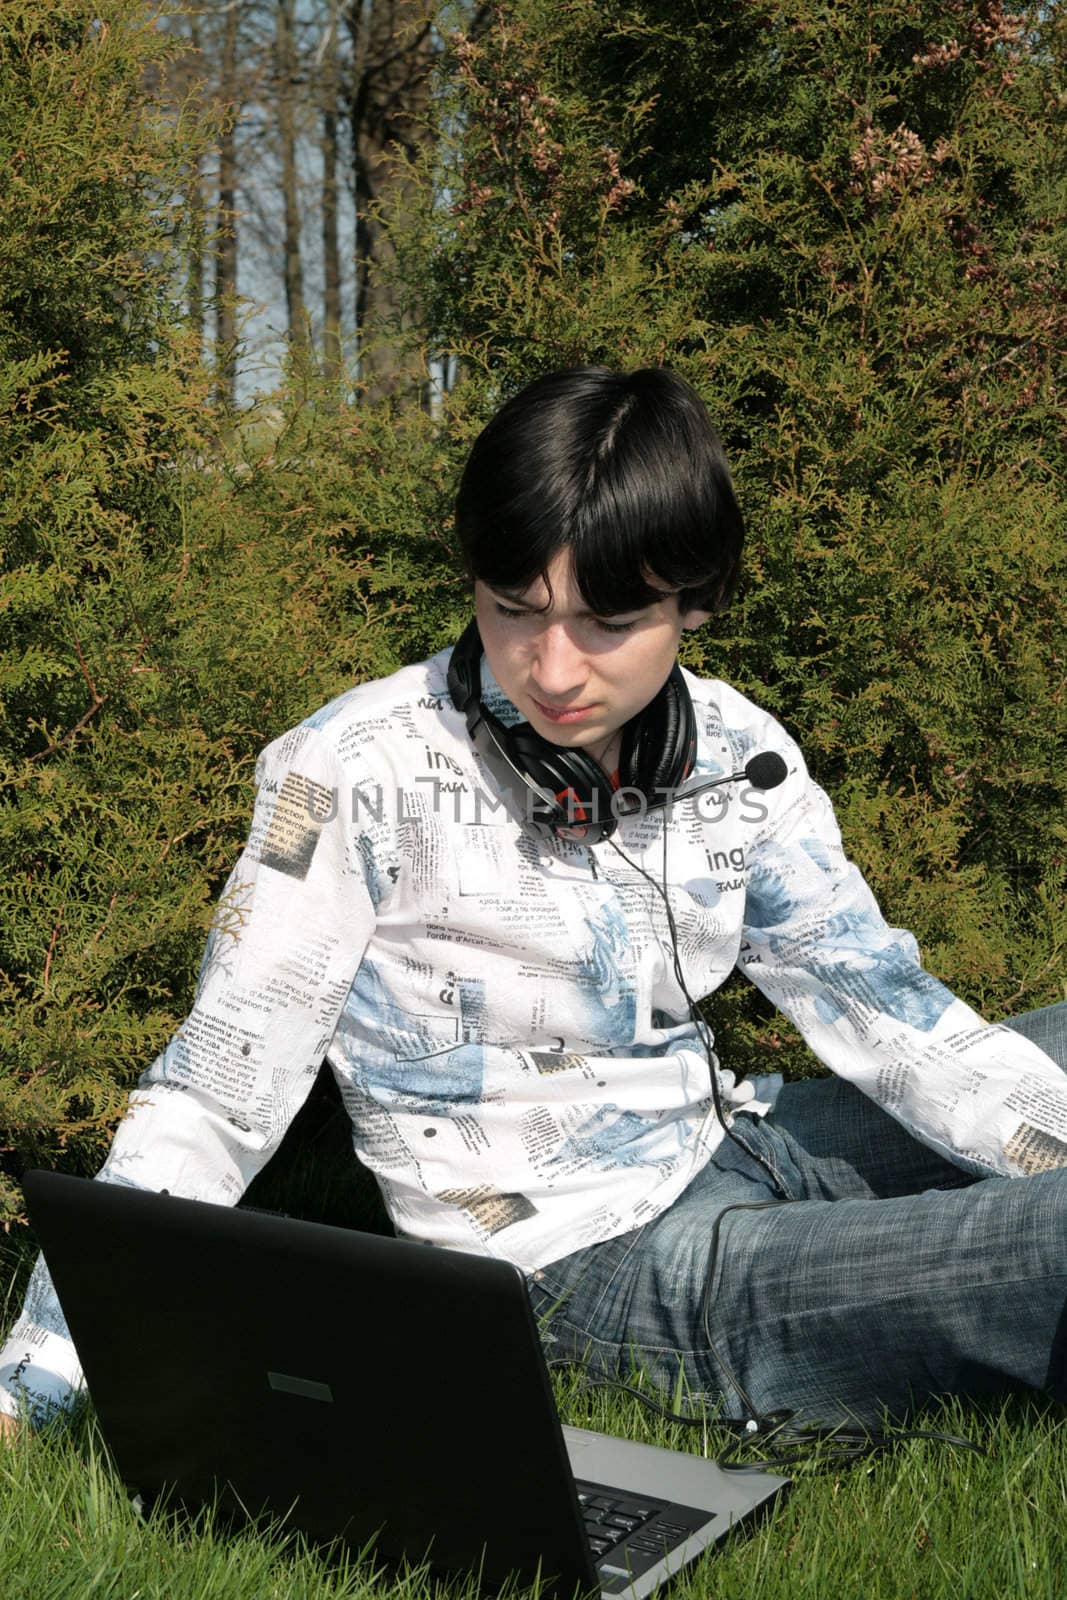 Closer view of a student and computer